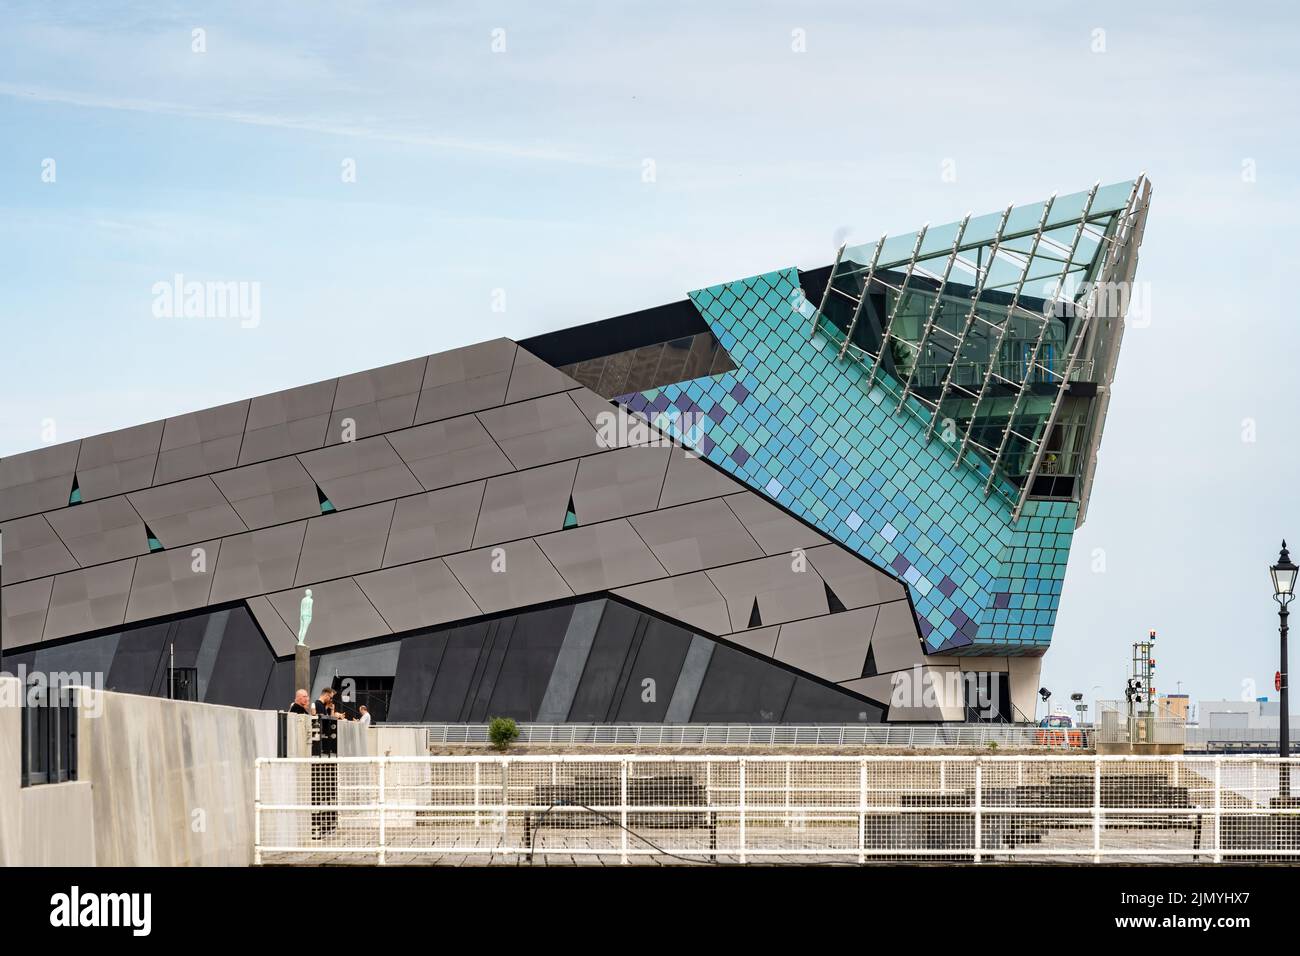 KINGSTON UPON HULL,  YORKSHIRE, UK - JULY 17: The Deep building by the marina in Kingston upon Hull on July 17, 2022. Three unid Stock Photo